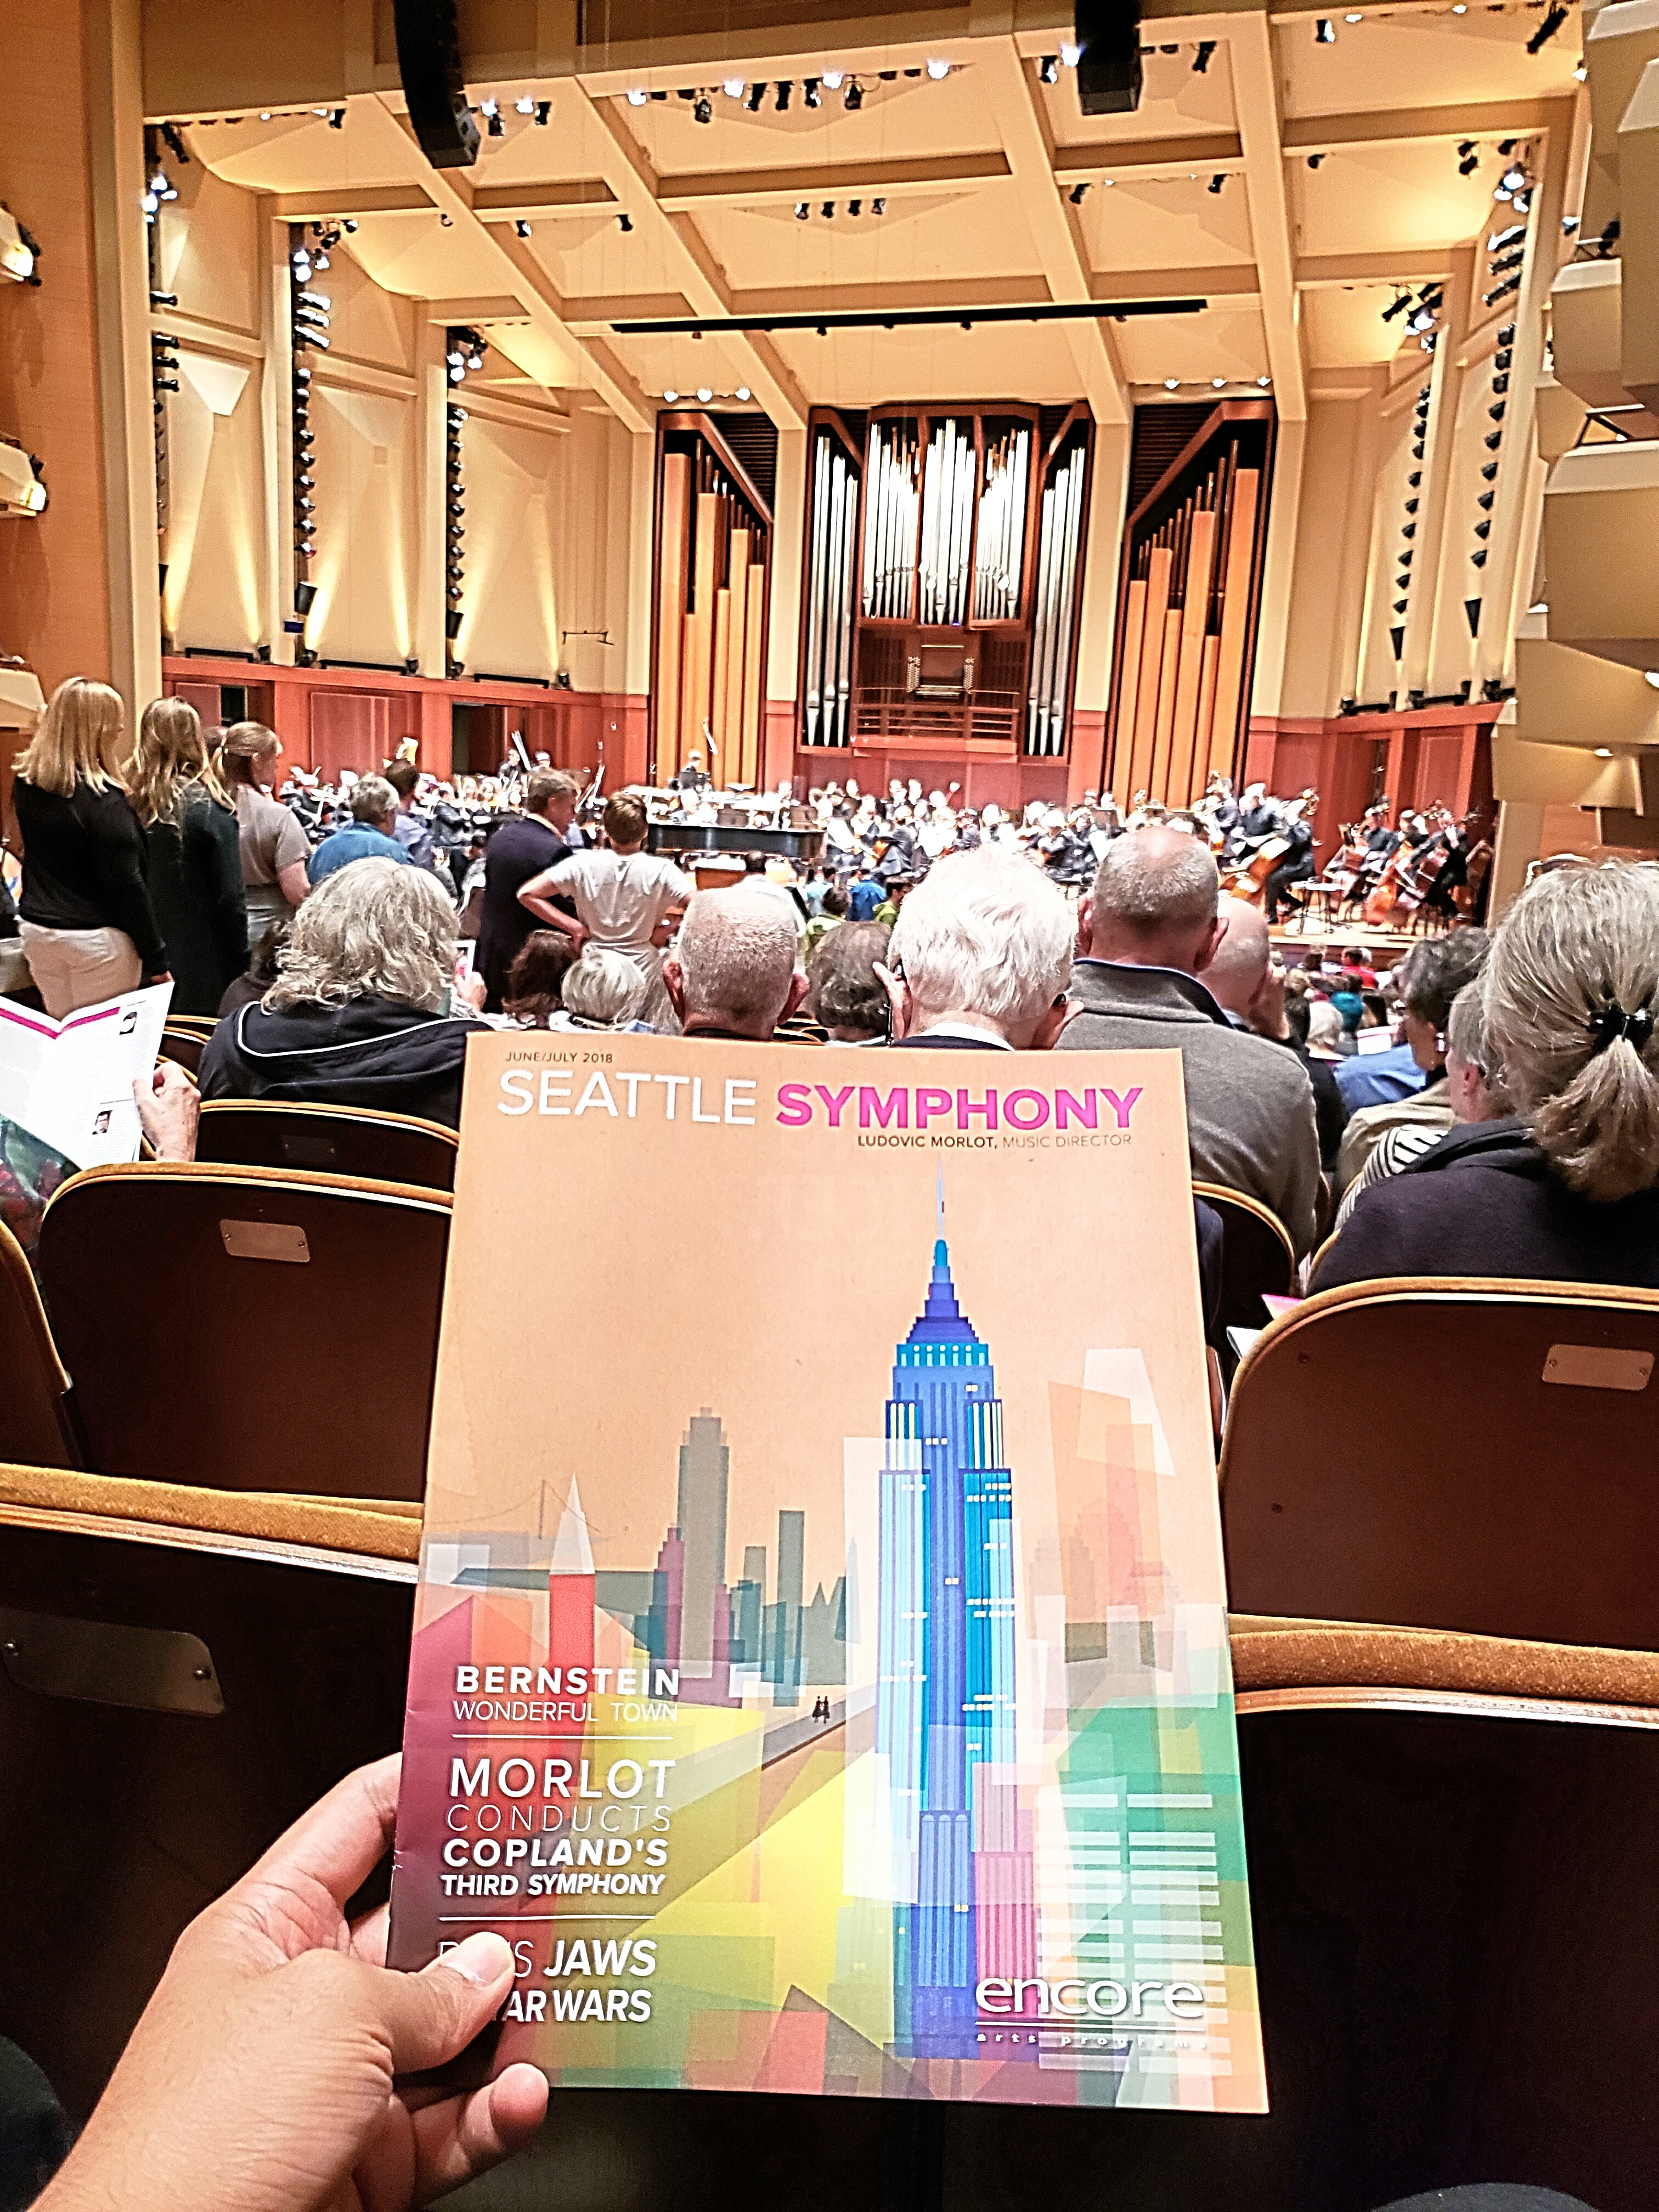 Attended the Seattle Symphony featuring music by Camille Saint-Saëns & Fredrick Chopin. 2nd time in my life @ the symphony. I must say, the audience is VERY gratuitous w/ applause & standing ovation than what I'm used to in musicals. Thanks for the tix Paul!